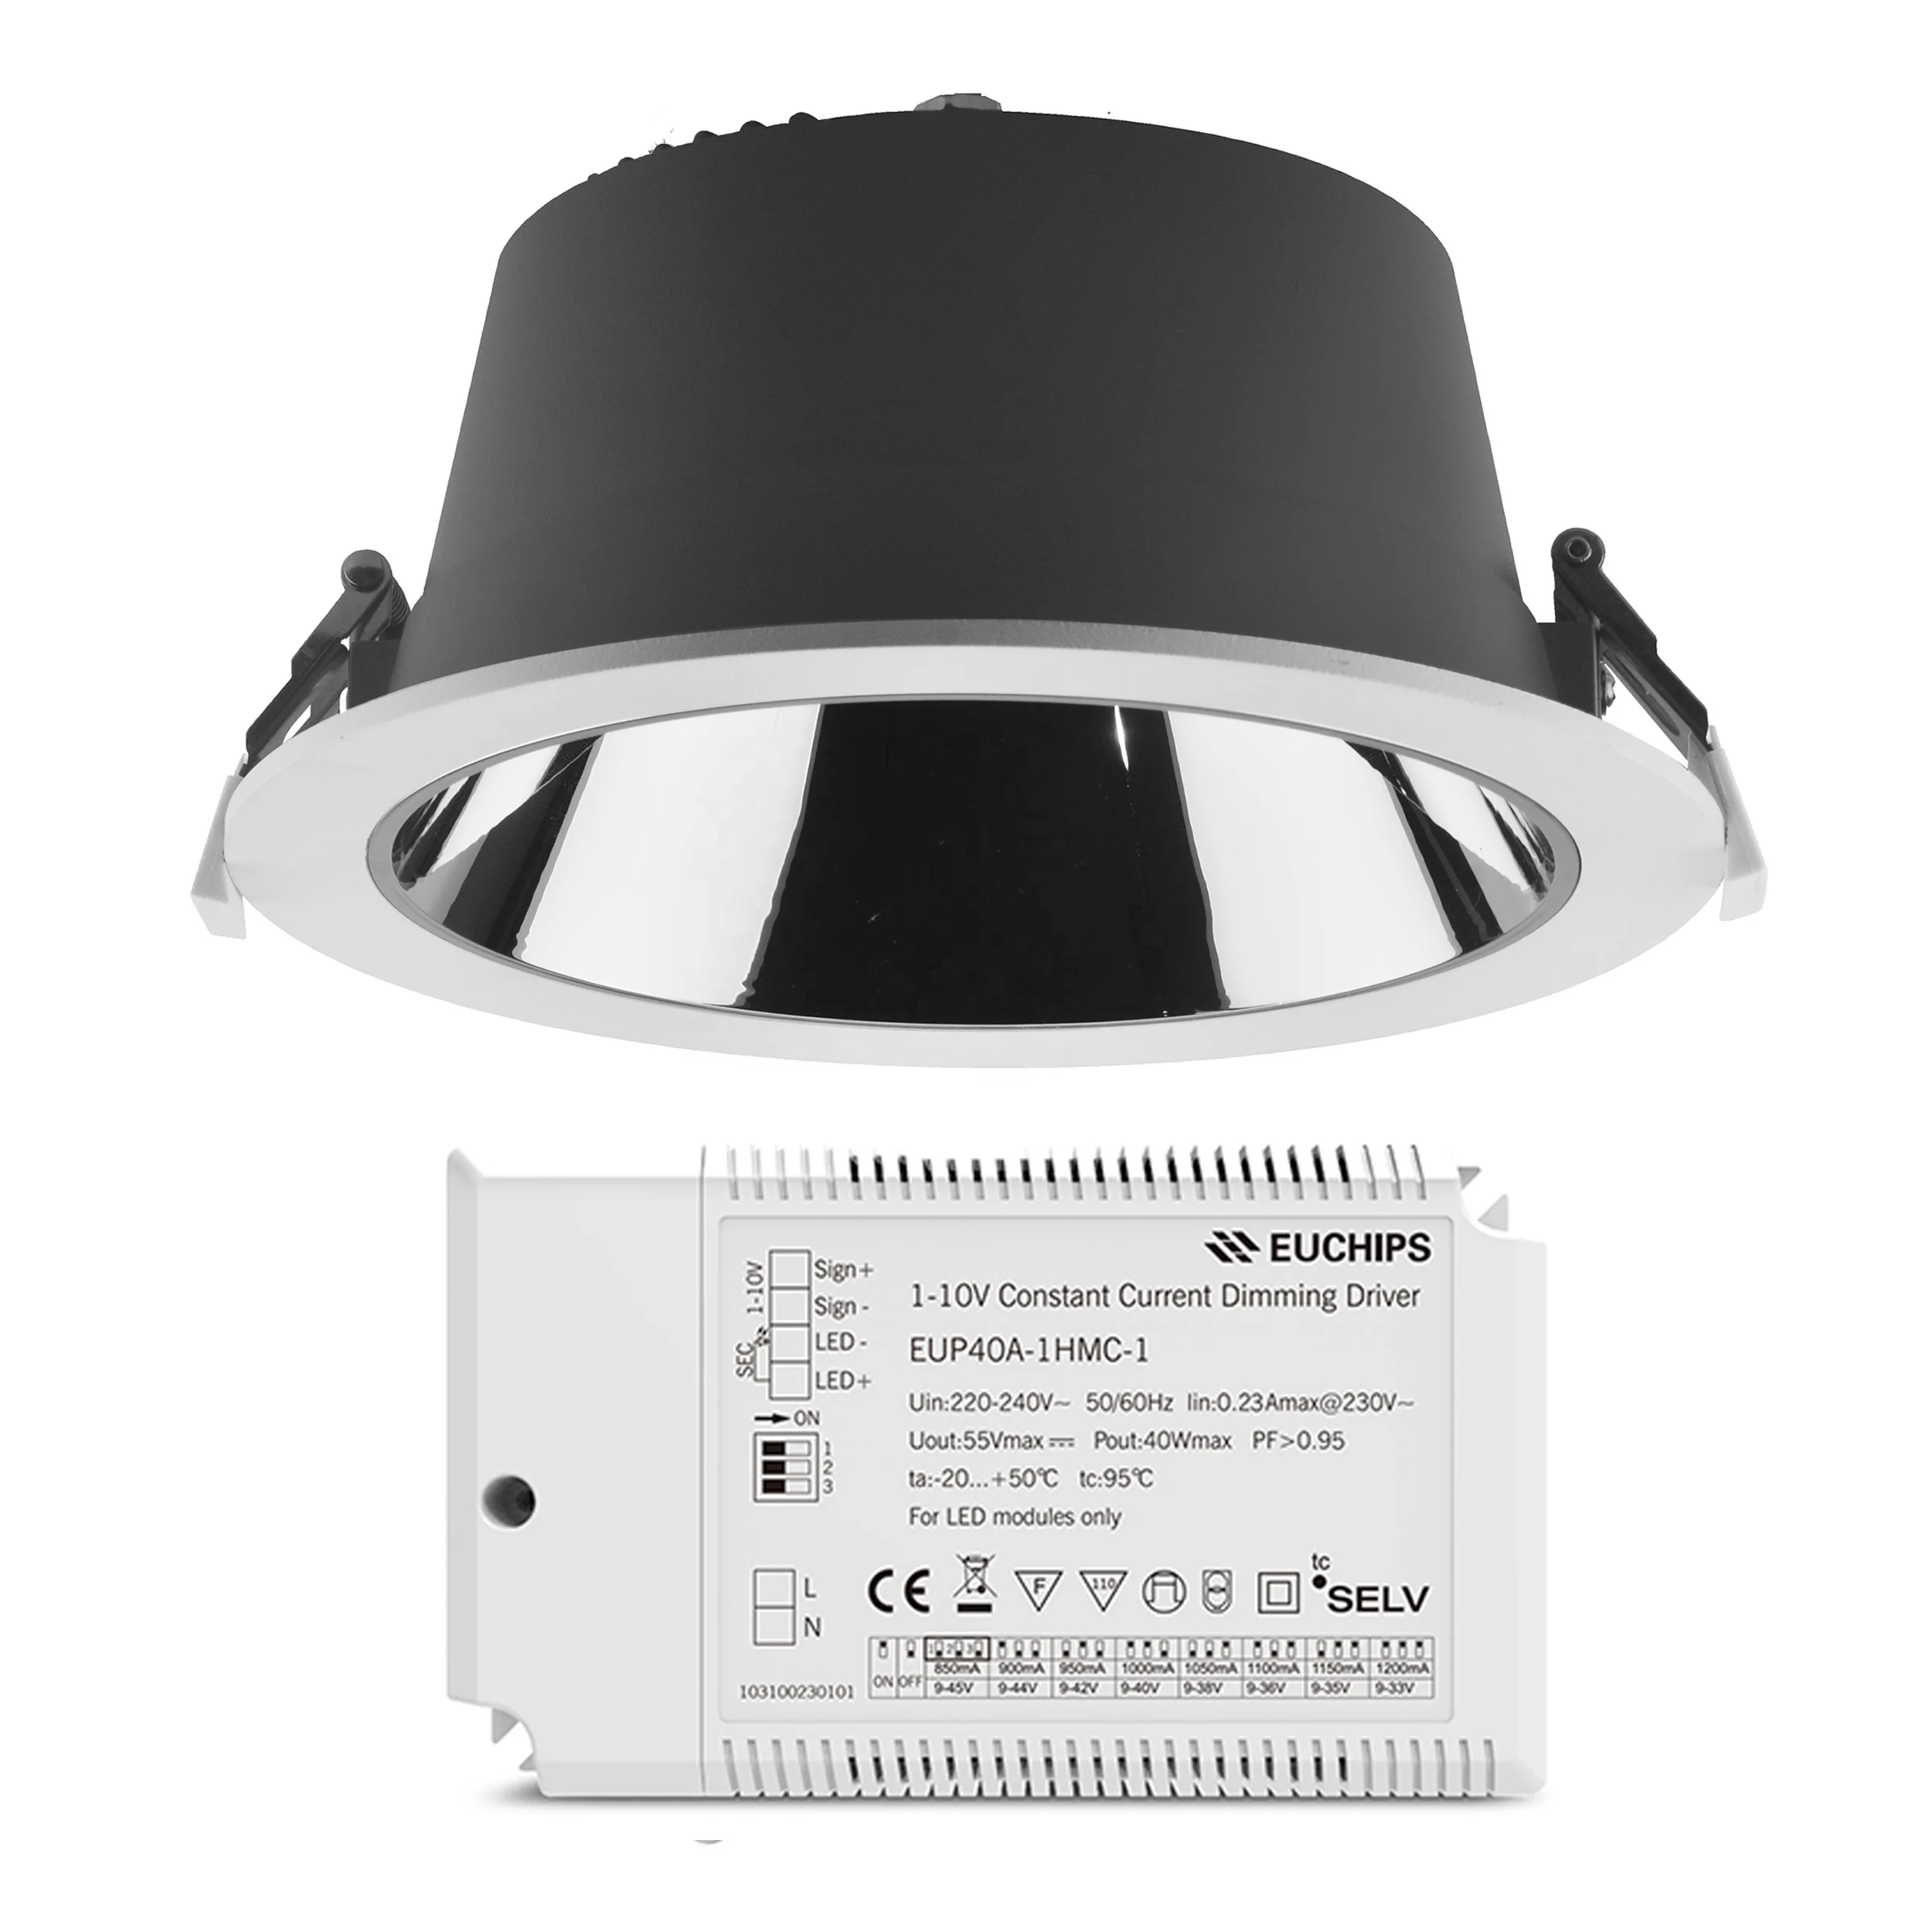 RD3003-0840B 8 inch 40W 0-10V Dimmable downlight LED Recessed downlight dimmable UGR<19 with 110Lm/W